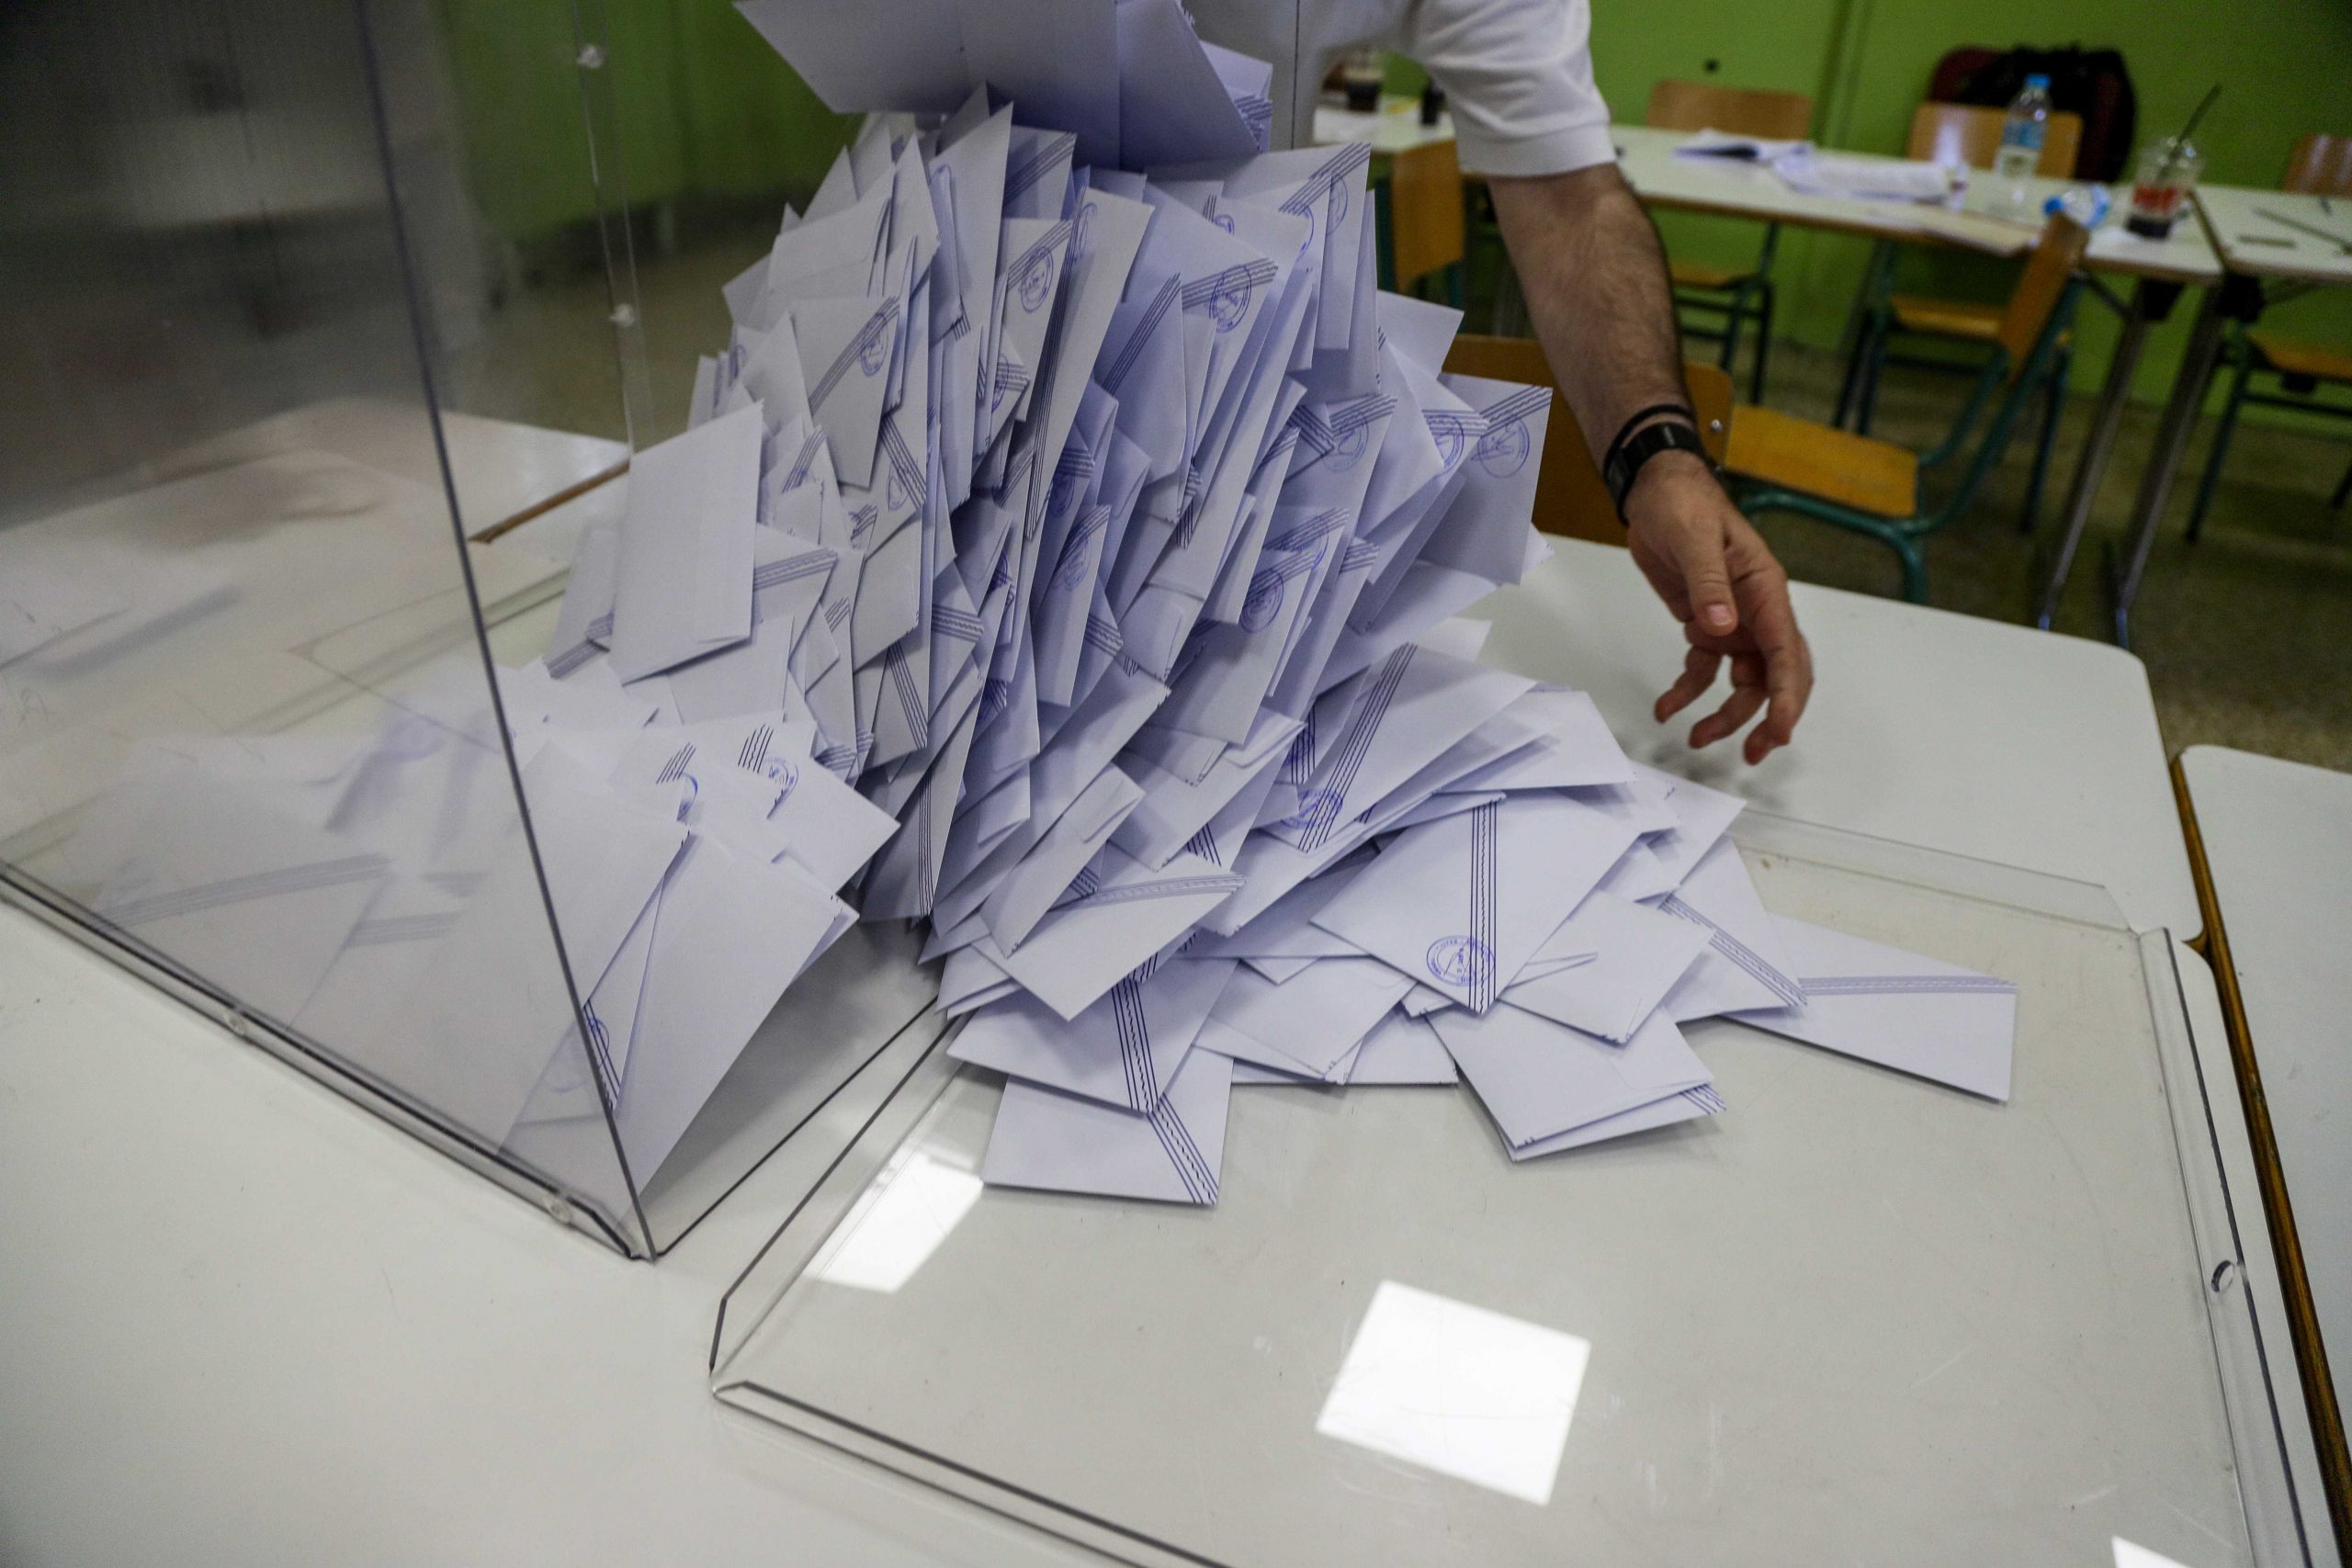 Postal Vote for Euro-Parliament Elex, Referendums Passed By Ruling Party Majority